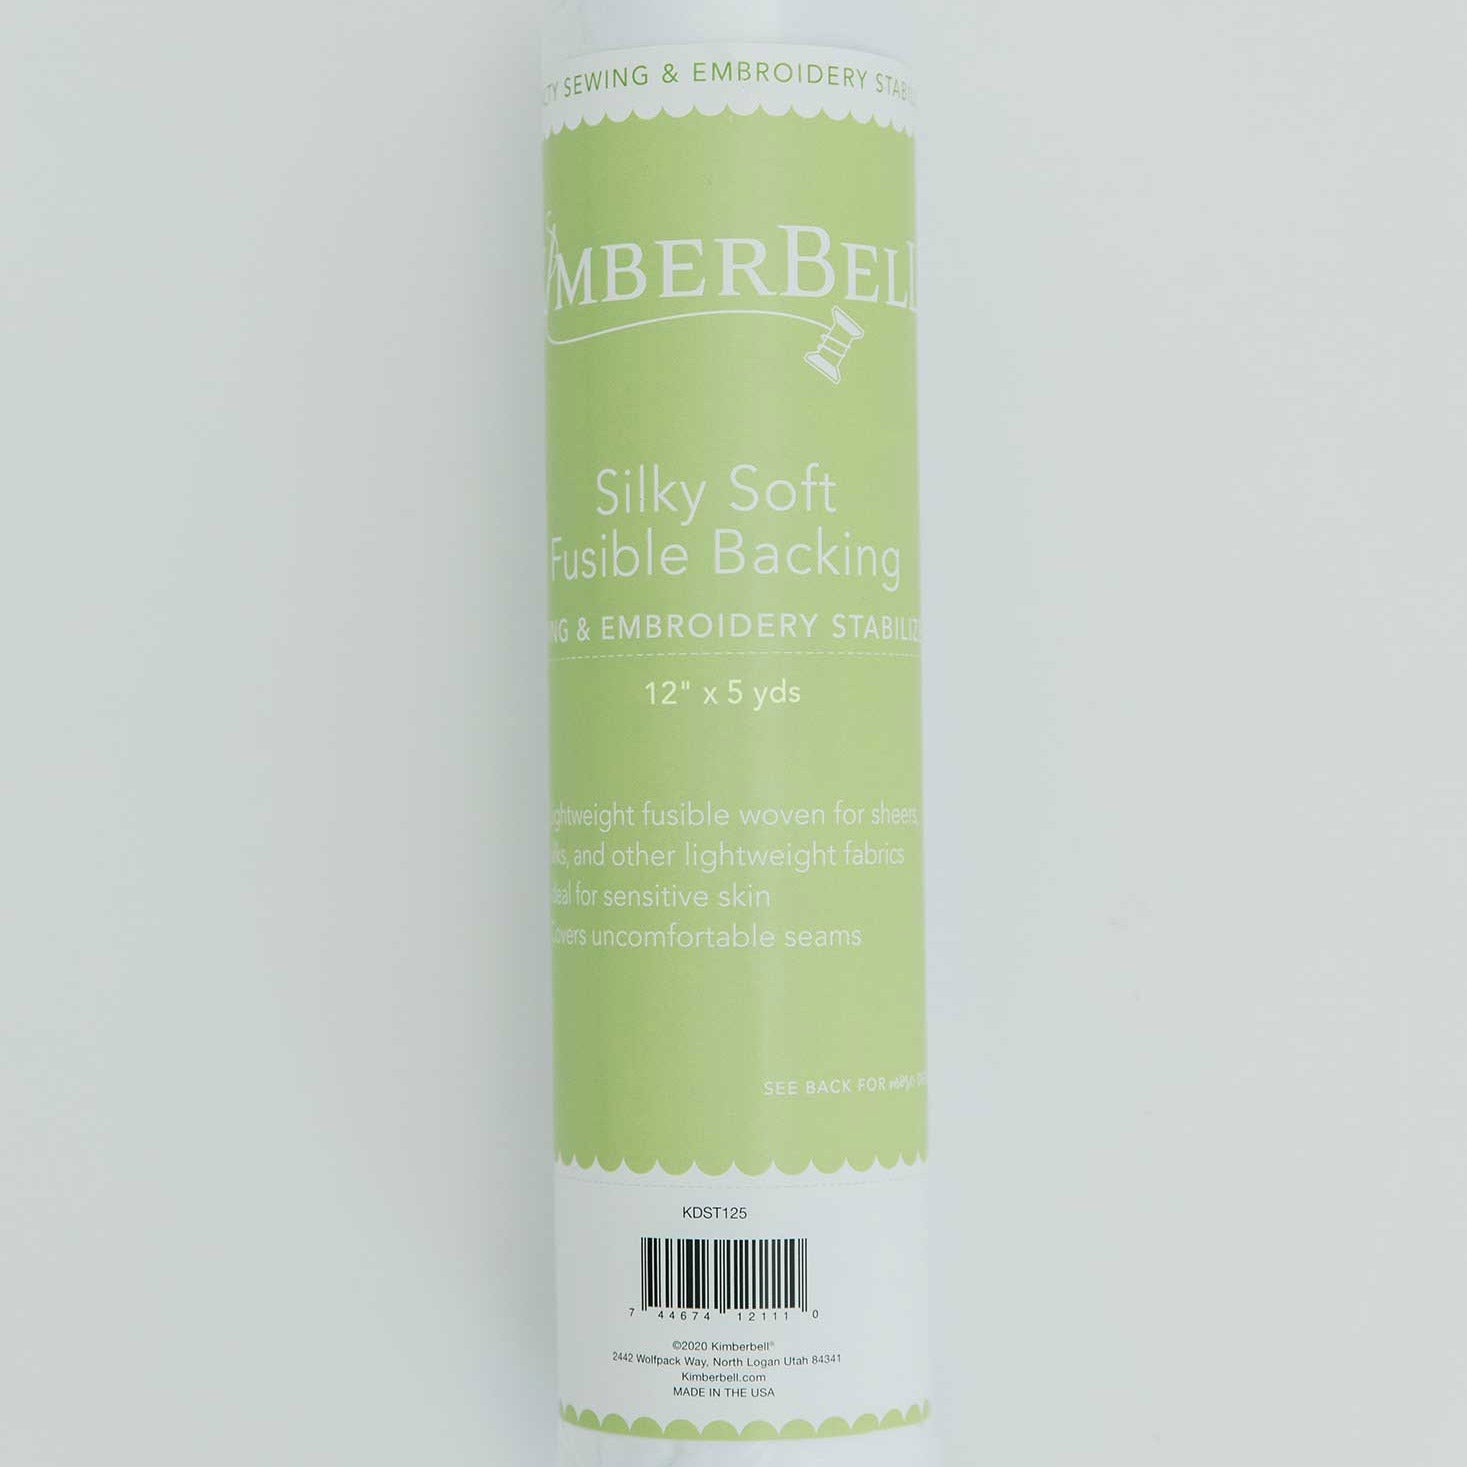 Silky Soft Fusible Backing (KDST125) by Kimberbell is color-coded in green to show it isa specialty stabilizer. It is a lightweight fusible woven for sheers, silks, and other lightweight fabrics to cover uncomfortable seams and for sensitive skin.  It is available in a 12" x 5 yard roll. Stitcher’s Joy